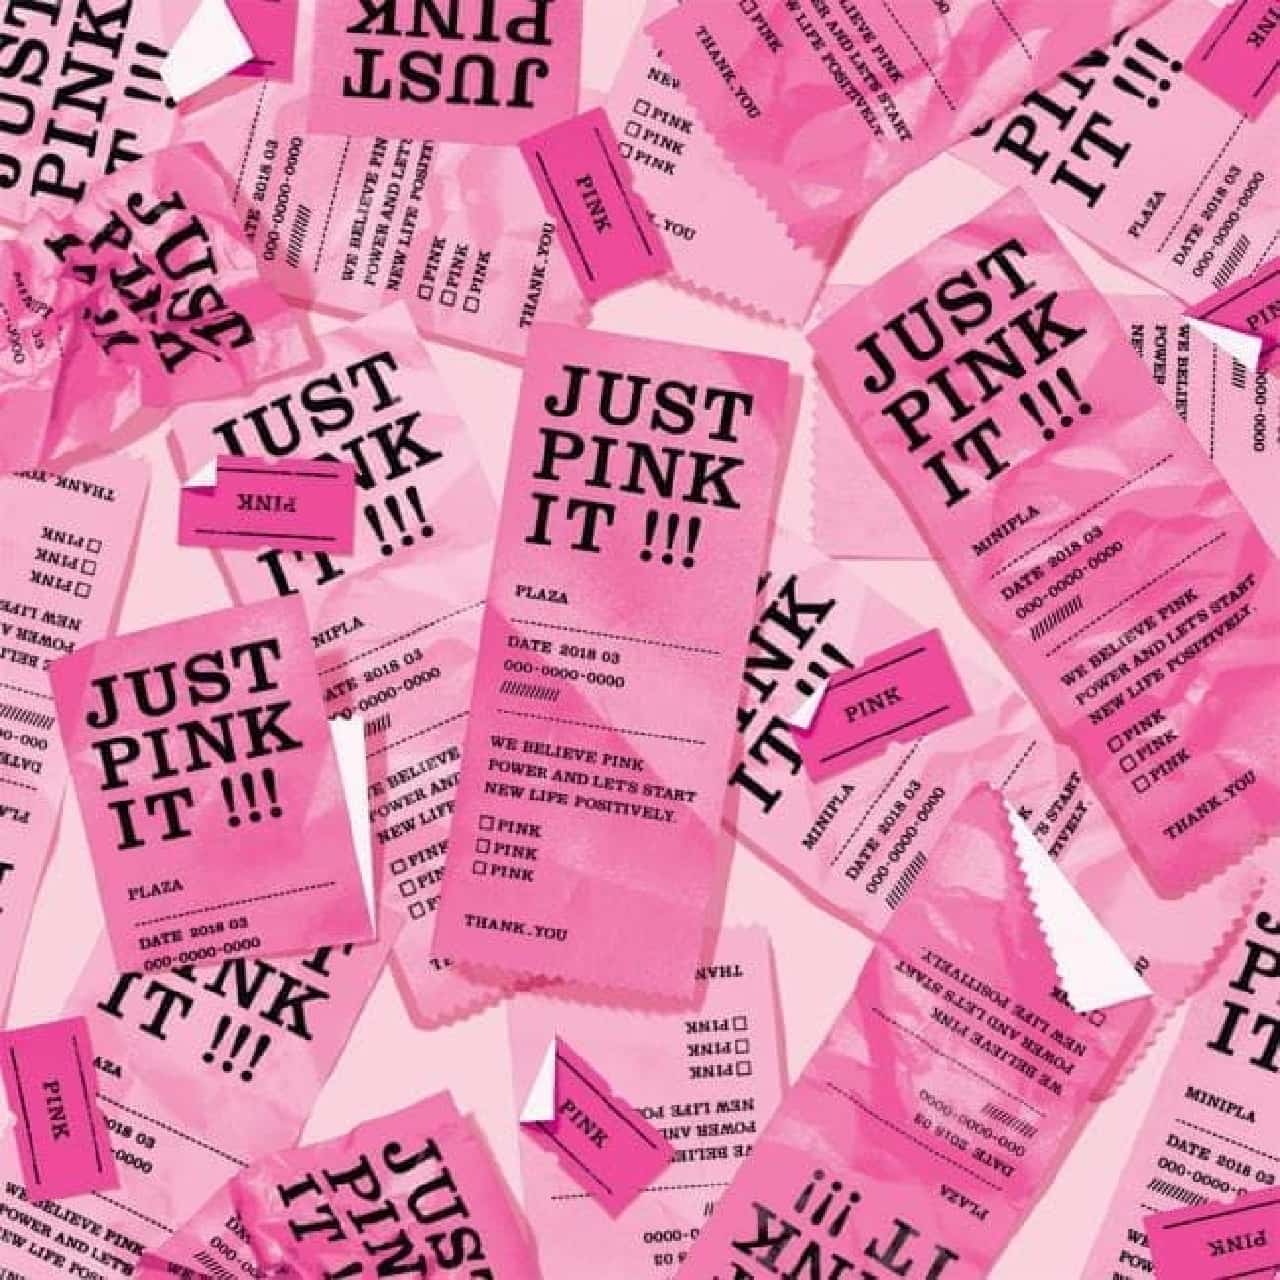 "JUST PINK IT!" Promotion at PLAZA and MINiPLA